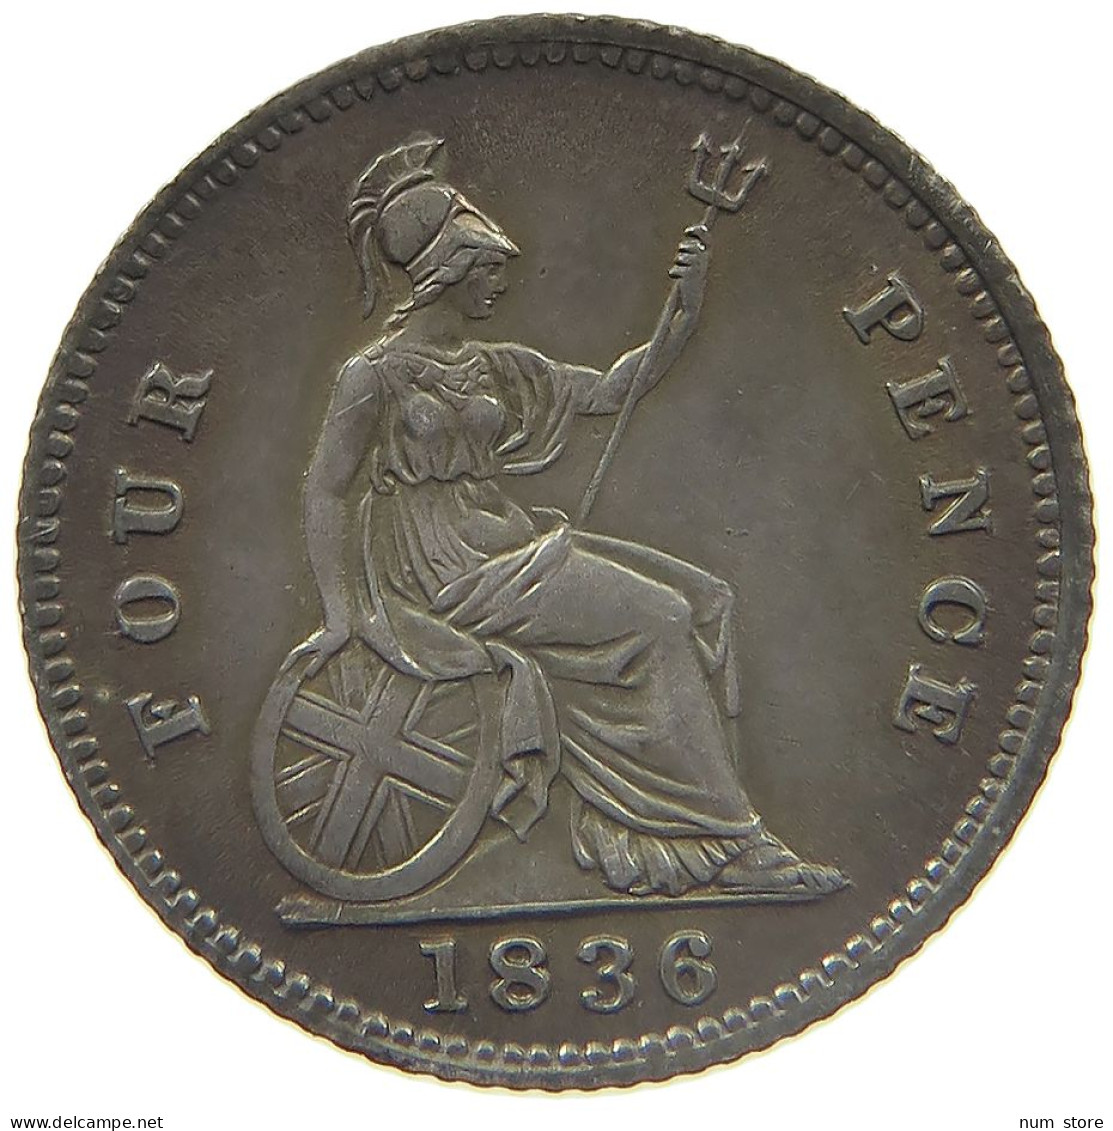 GREAT BRITAIN FOURPENCE 1836 WILLIAM IV. (1830-1837) #MA 023020 - G. 4 Pence/ Groat